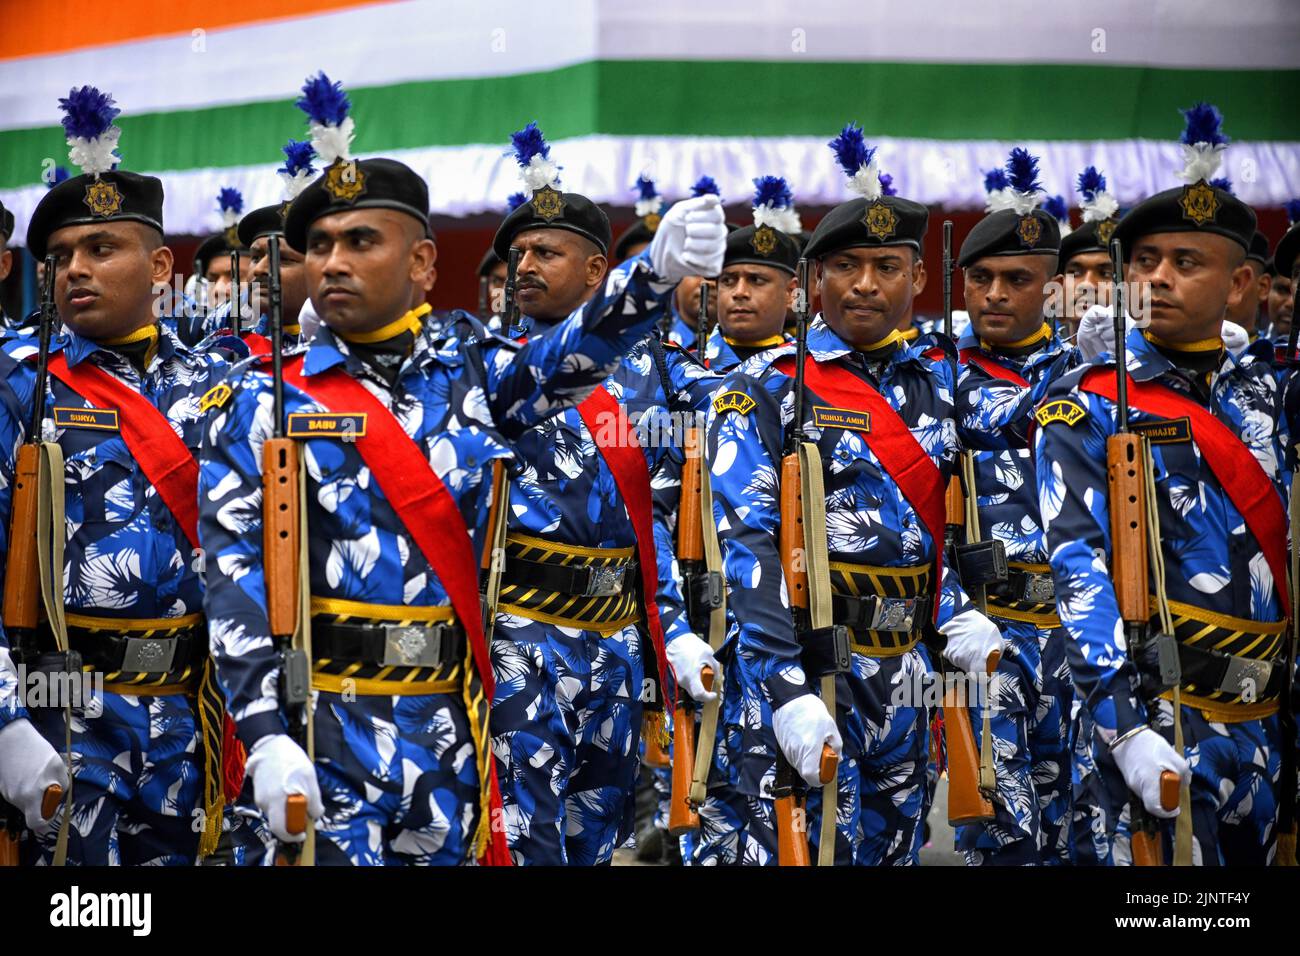 Rapid Action Force (RAF) Police men's Team seen practicing during the Independence day Final Dress Rehearsal. India prepares to celebrate the 75th Independence day on 15th August 2022 as part of the Azadi Ka Amrit Mahotsav celebration. Stock Photo